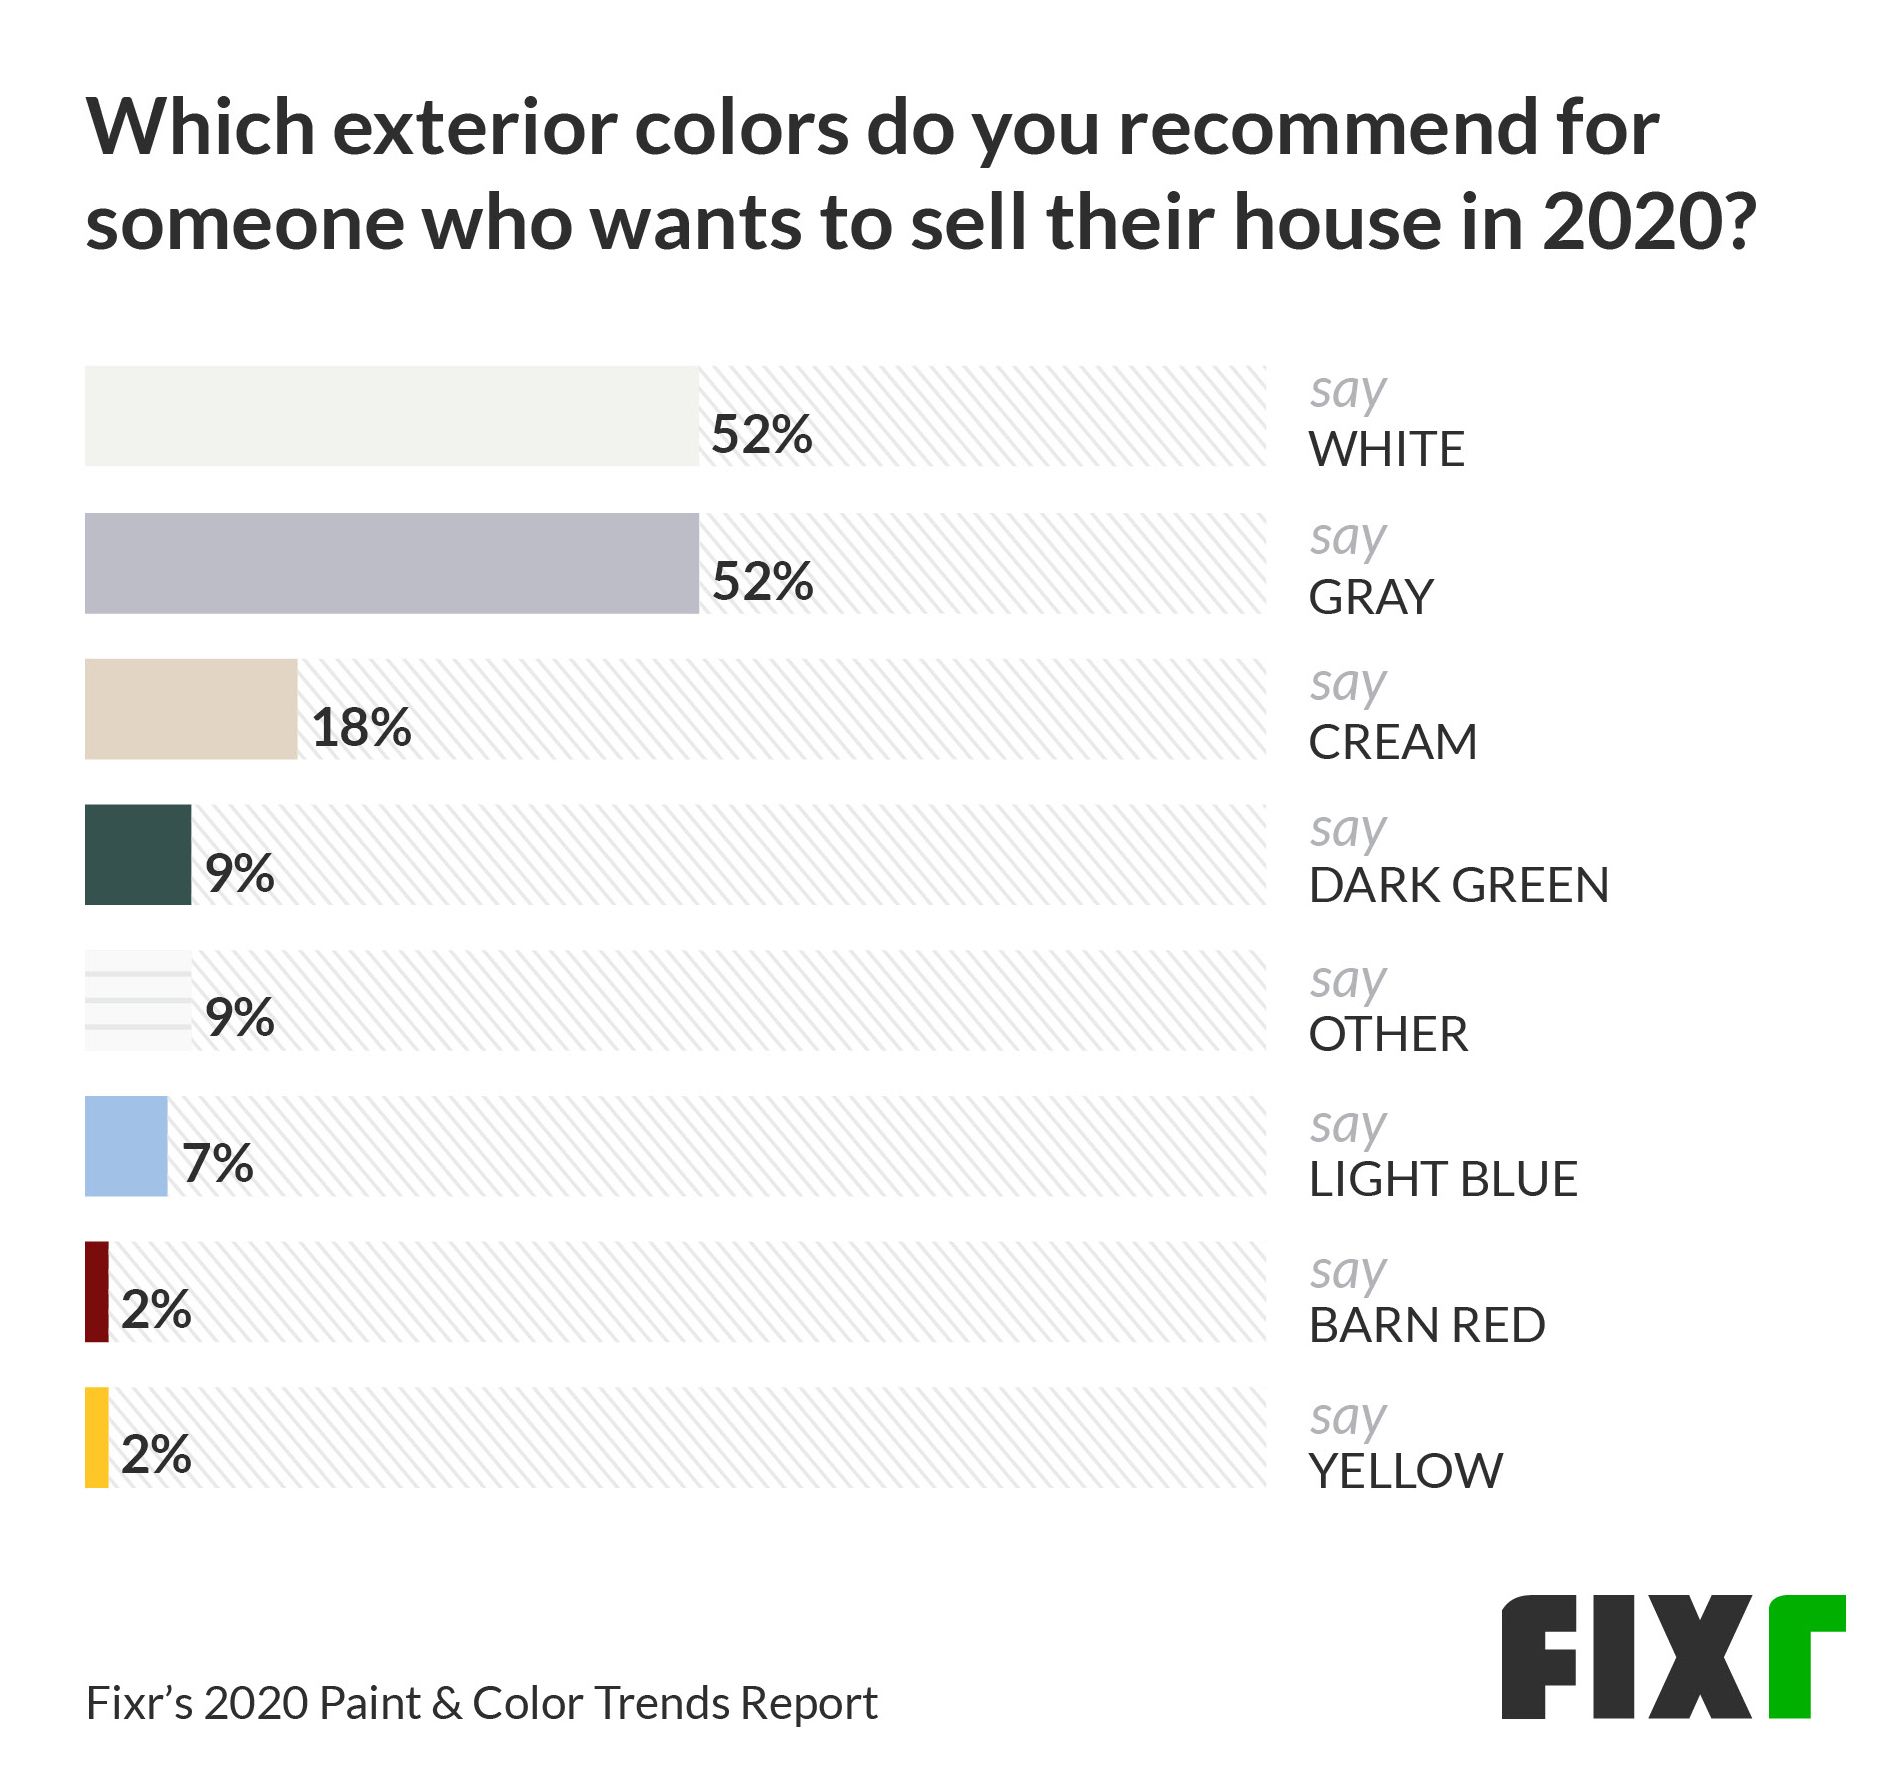 Recommended exterior colors to sell a house in 2020